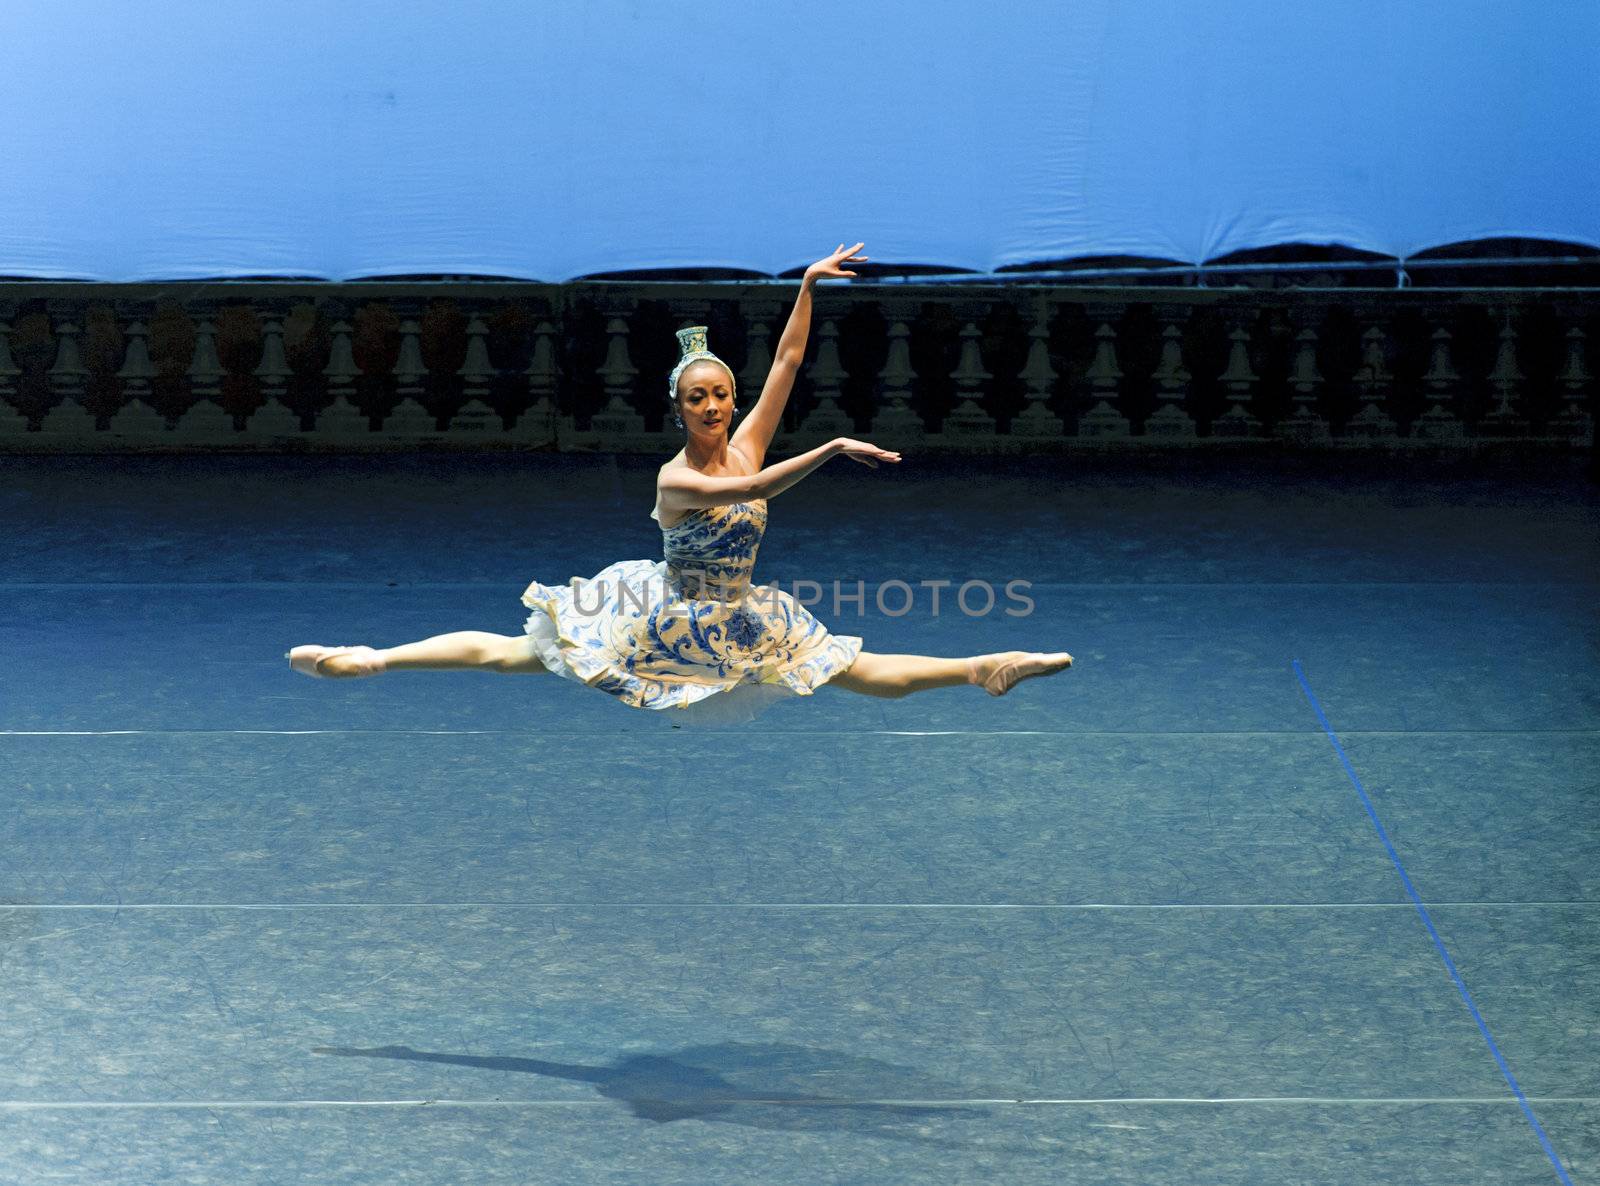 CHENGDU - JAN 5: ballerina of The national ballet of china performs on stage at Jincheng theater.Jan 5, 2012 in Chengdu, China.
